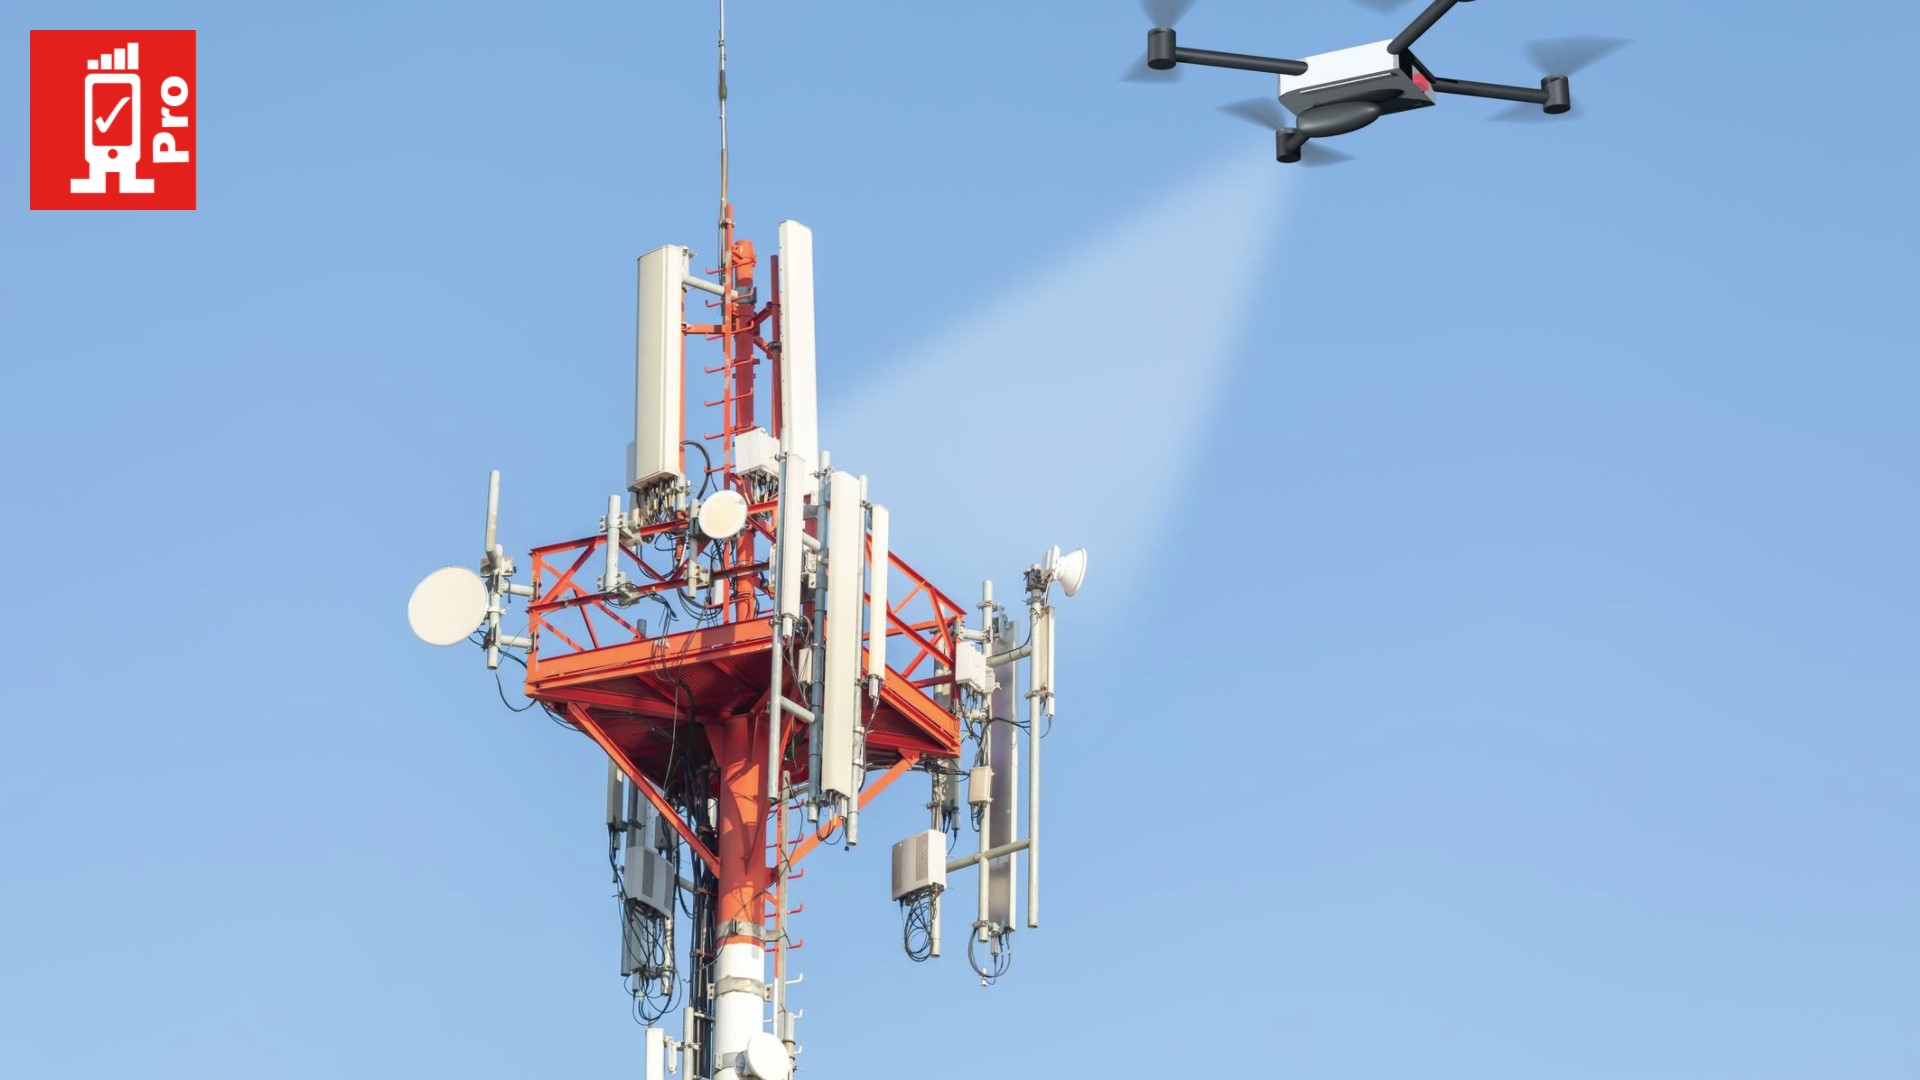 sav pas overdraw Can drones perform mobile network testing | 5G and drones | RantCell Blog